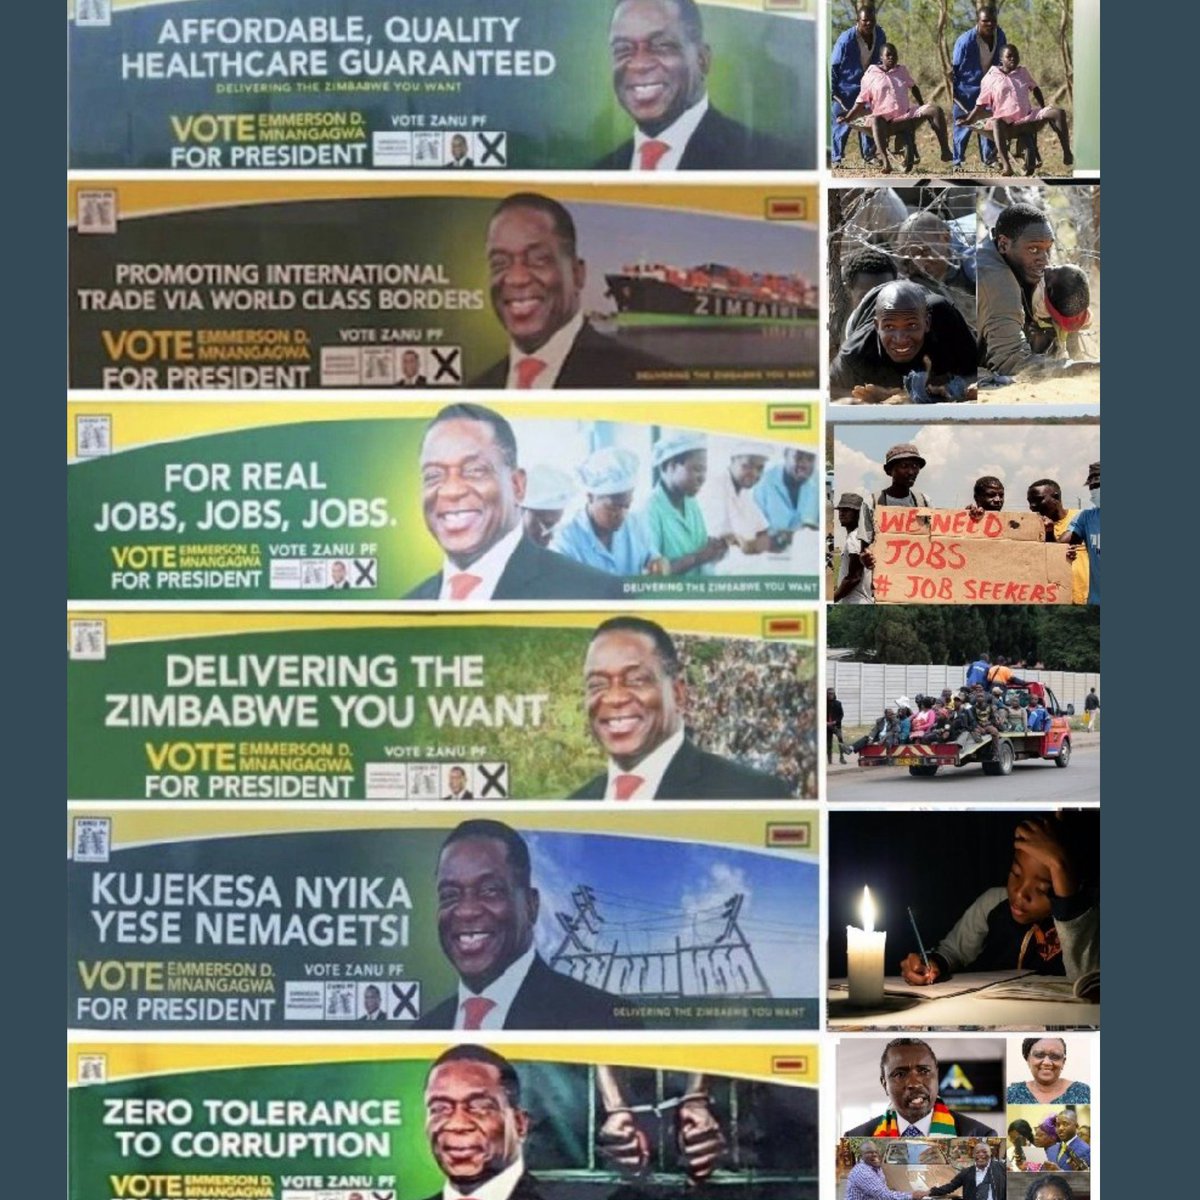 Just a reminder AFFORDABLE, QUALITY HEALTHCARE GUARANTEED ❌ PROMOTING INTERNATIONAL TRADE VIA WORLD CLASS BORDERS❌ FOR REAL JOBS, JOBS, JOBS❌ DELIVERING THE ZIMBABWE YOU WANT❌ KUJEKESA NYIKA YESE NEMAGETSI❌ ZERO TOLERANCE TO CORRUPTION❌